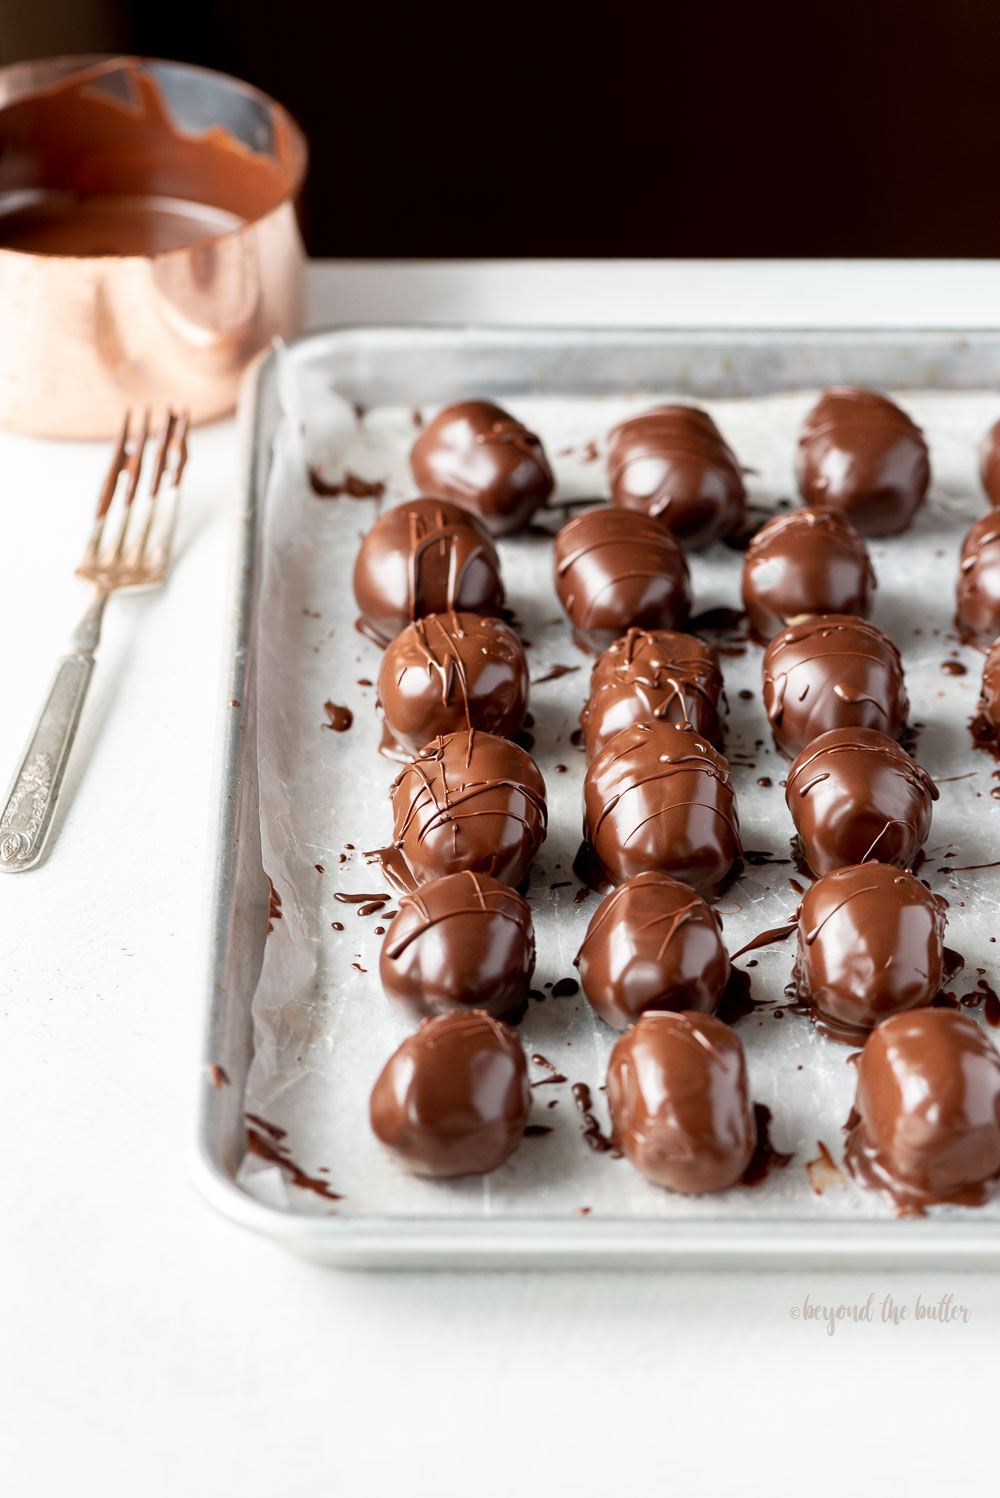 Angled photo of chocolate covered peanut butter eggs on a baking sheet | Image and Copyright Policy: © Beyond the Butter, LLC